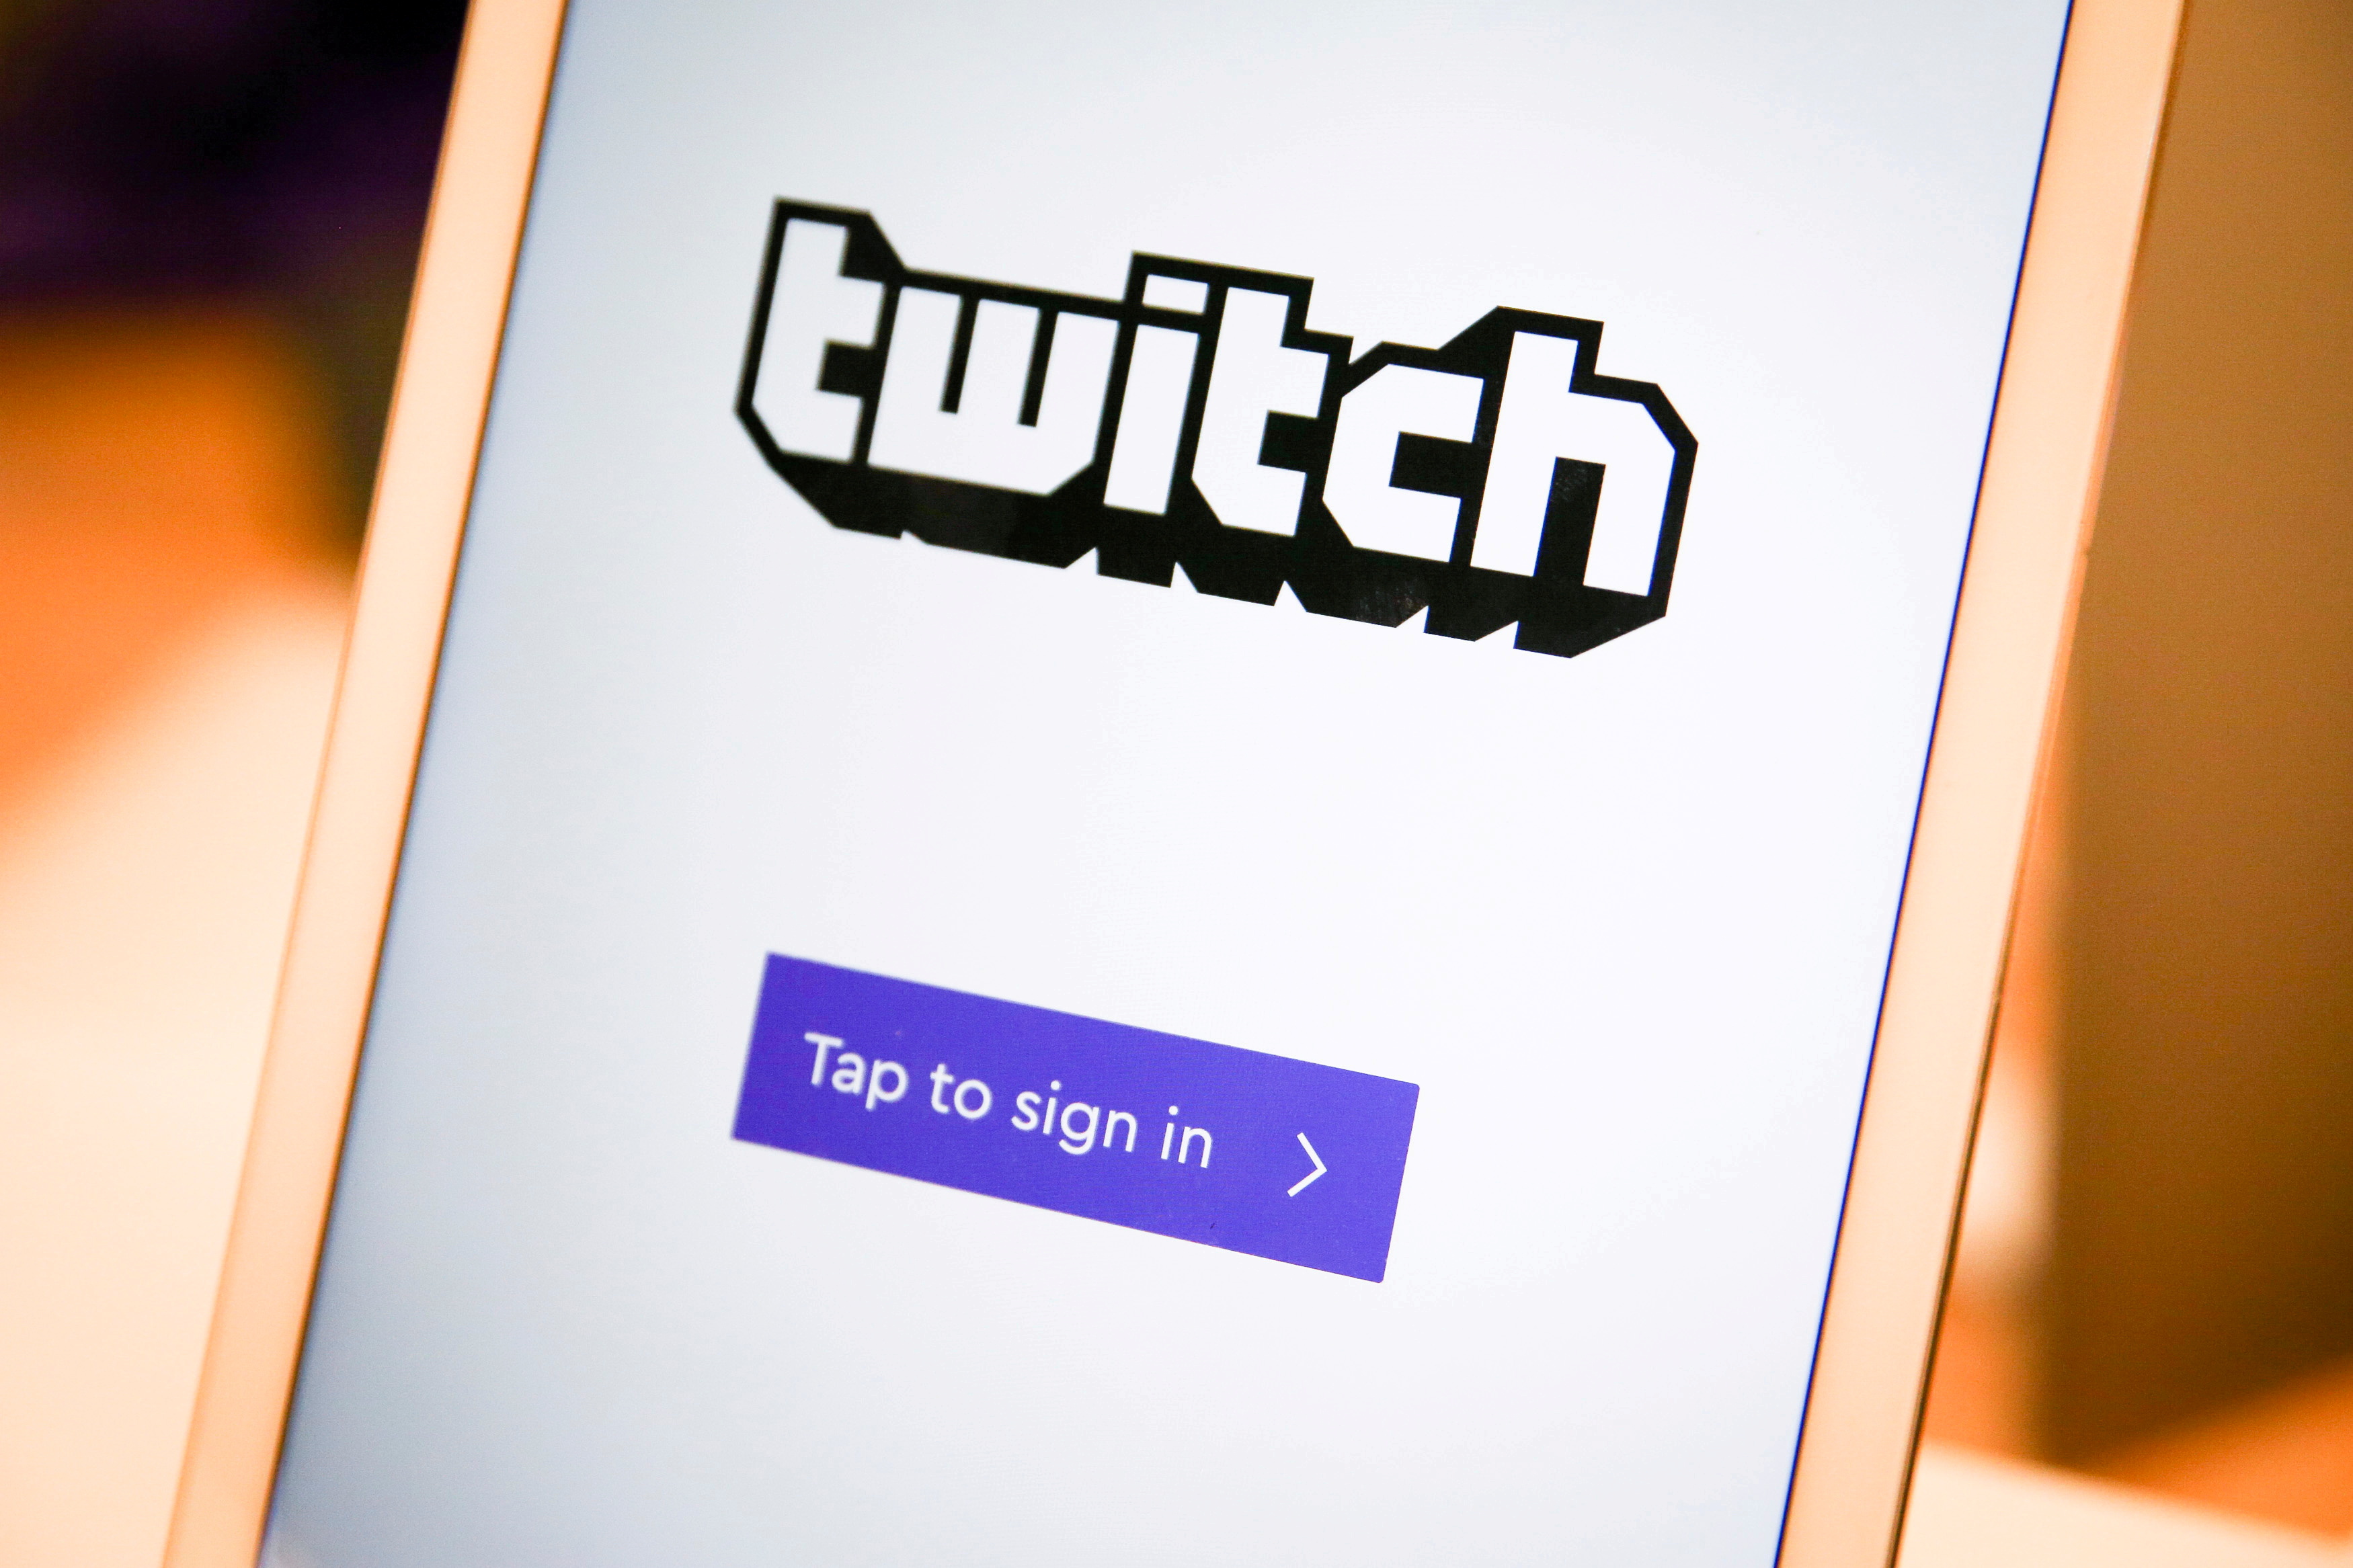 A twitch sign-in screen is seen at the offices of Twitch Interactive Inc, a social video platform and gaming community owned by Amazon, in San Francisco, California